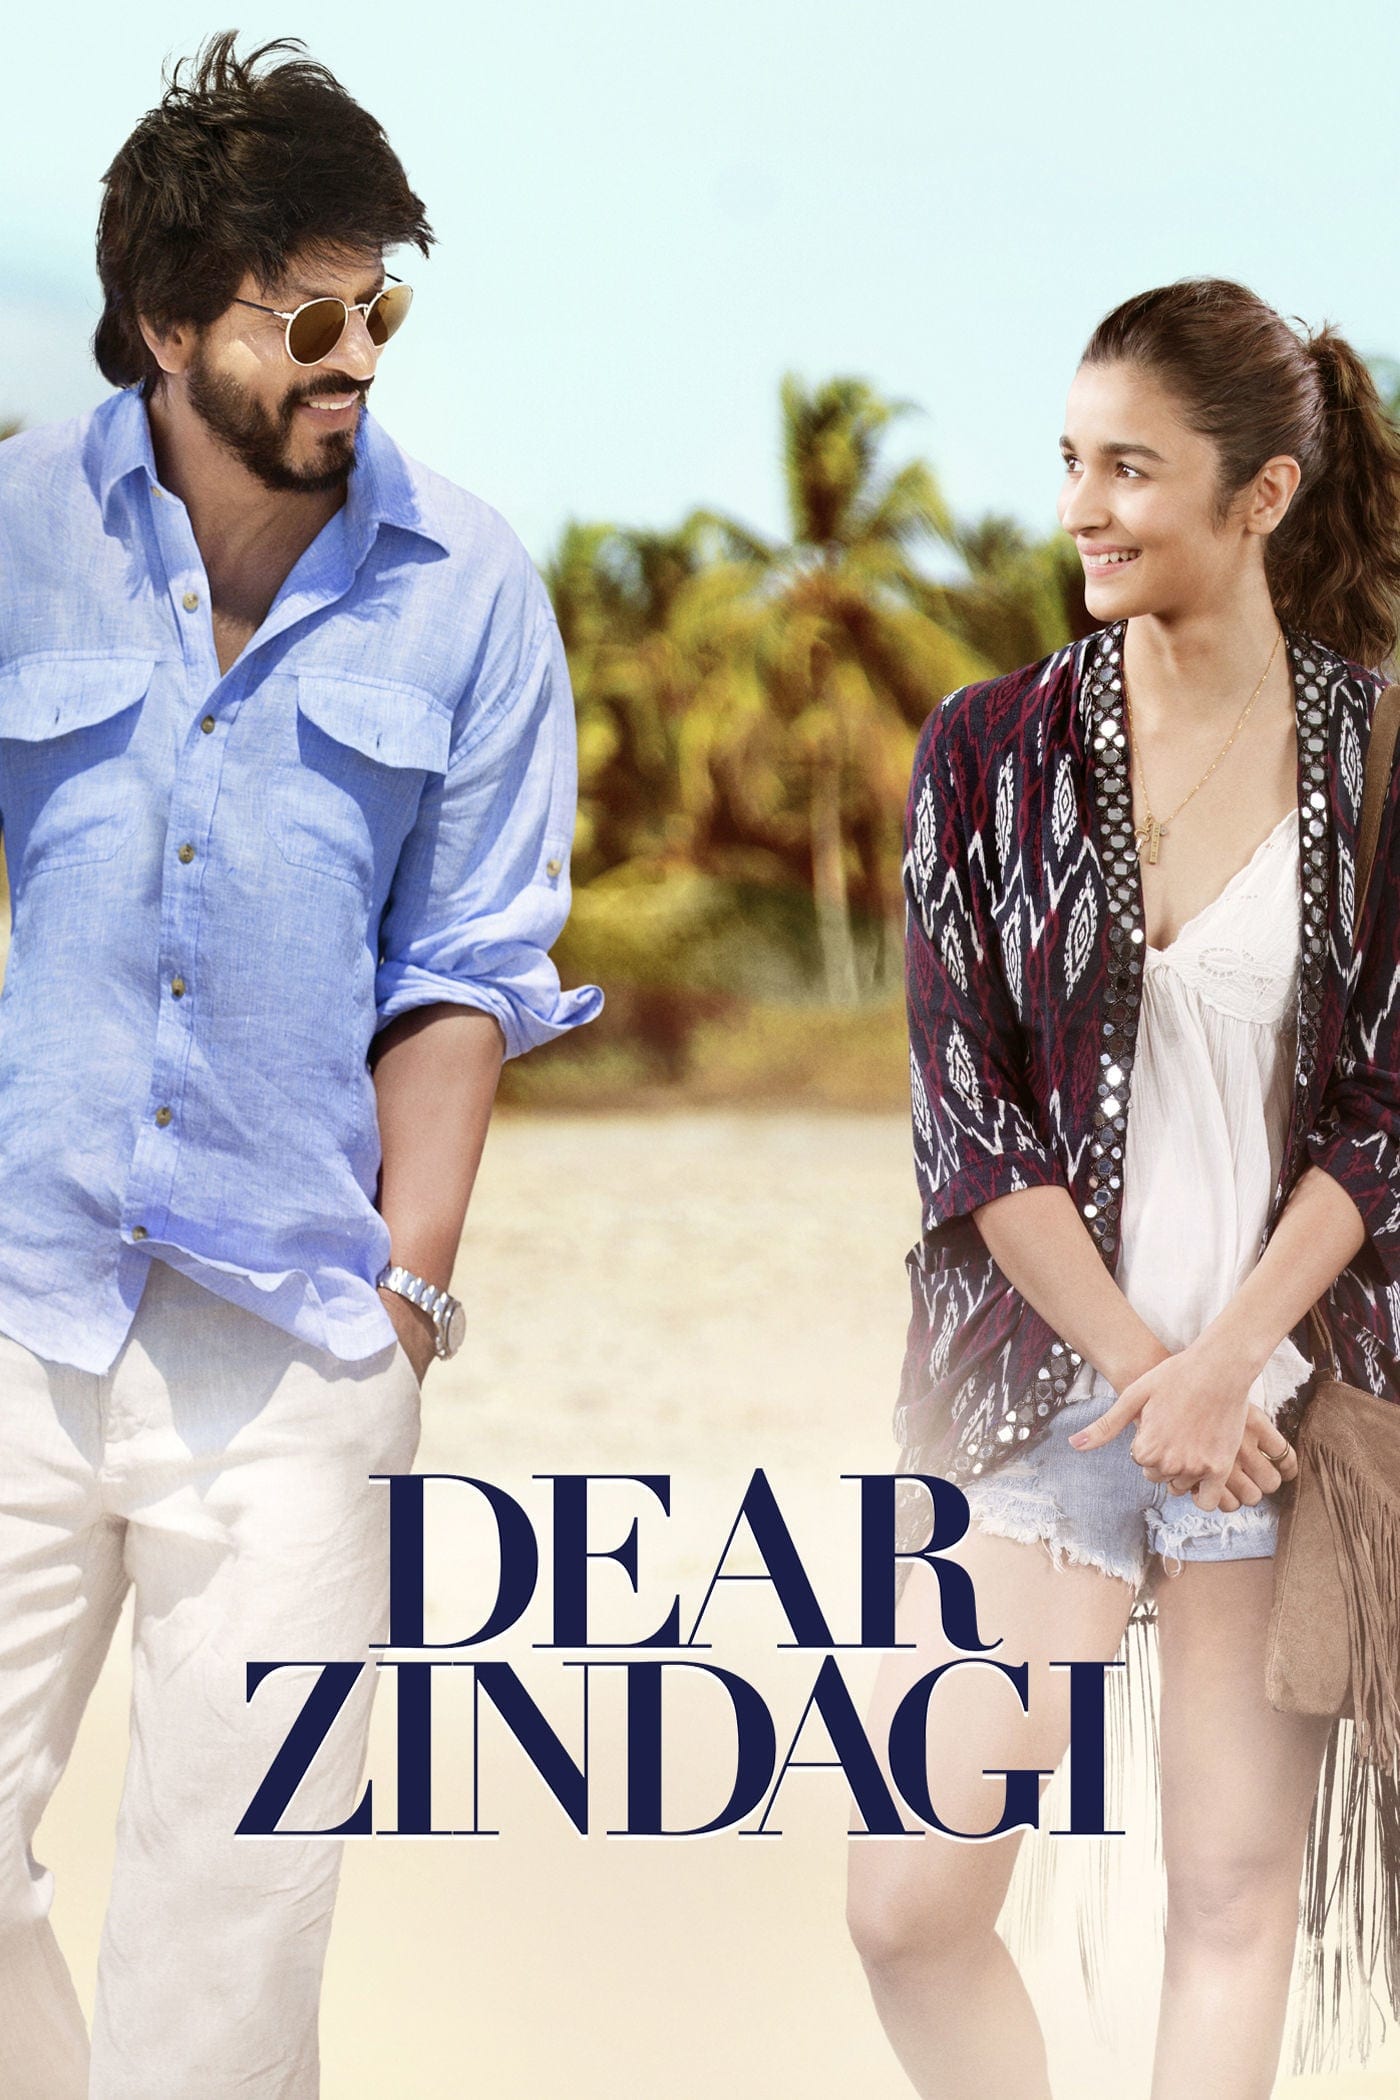 Poster for the movie "Dear Zindagi"